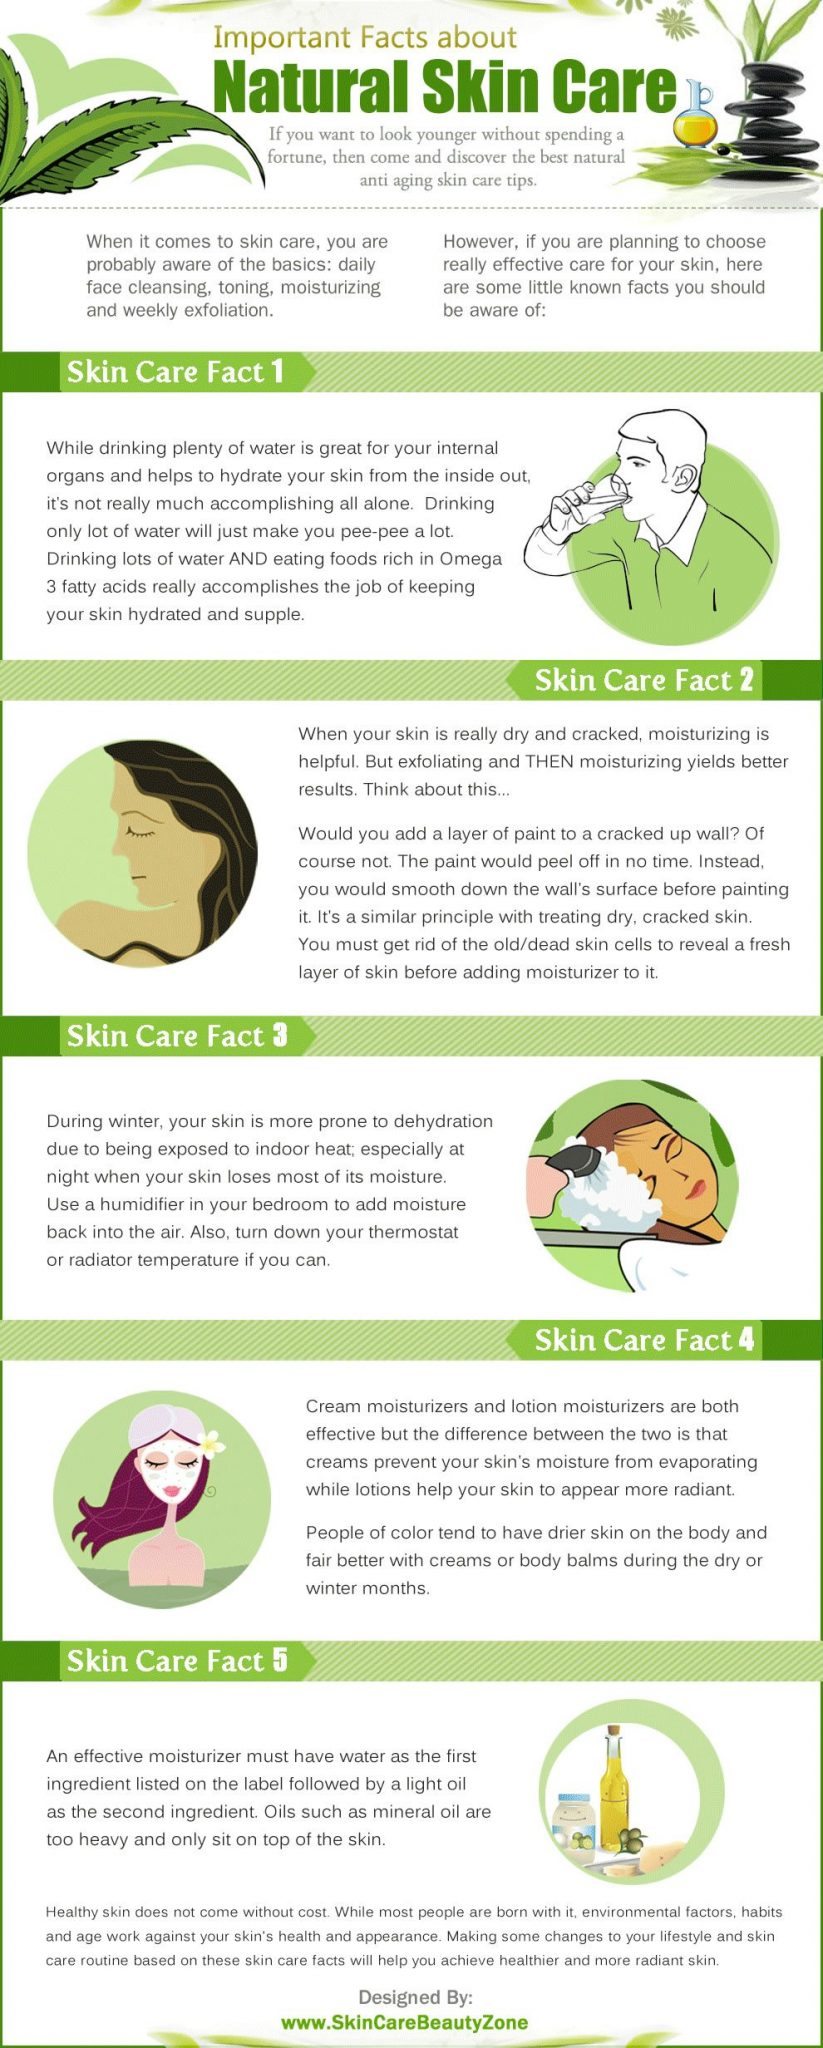 Natural Skin Care Facts Infographic